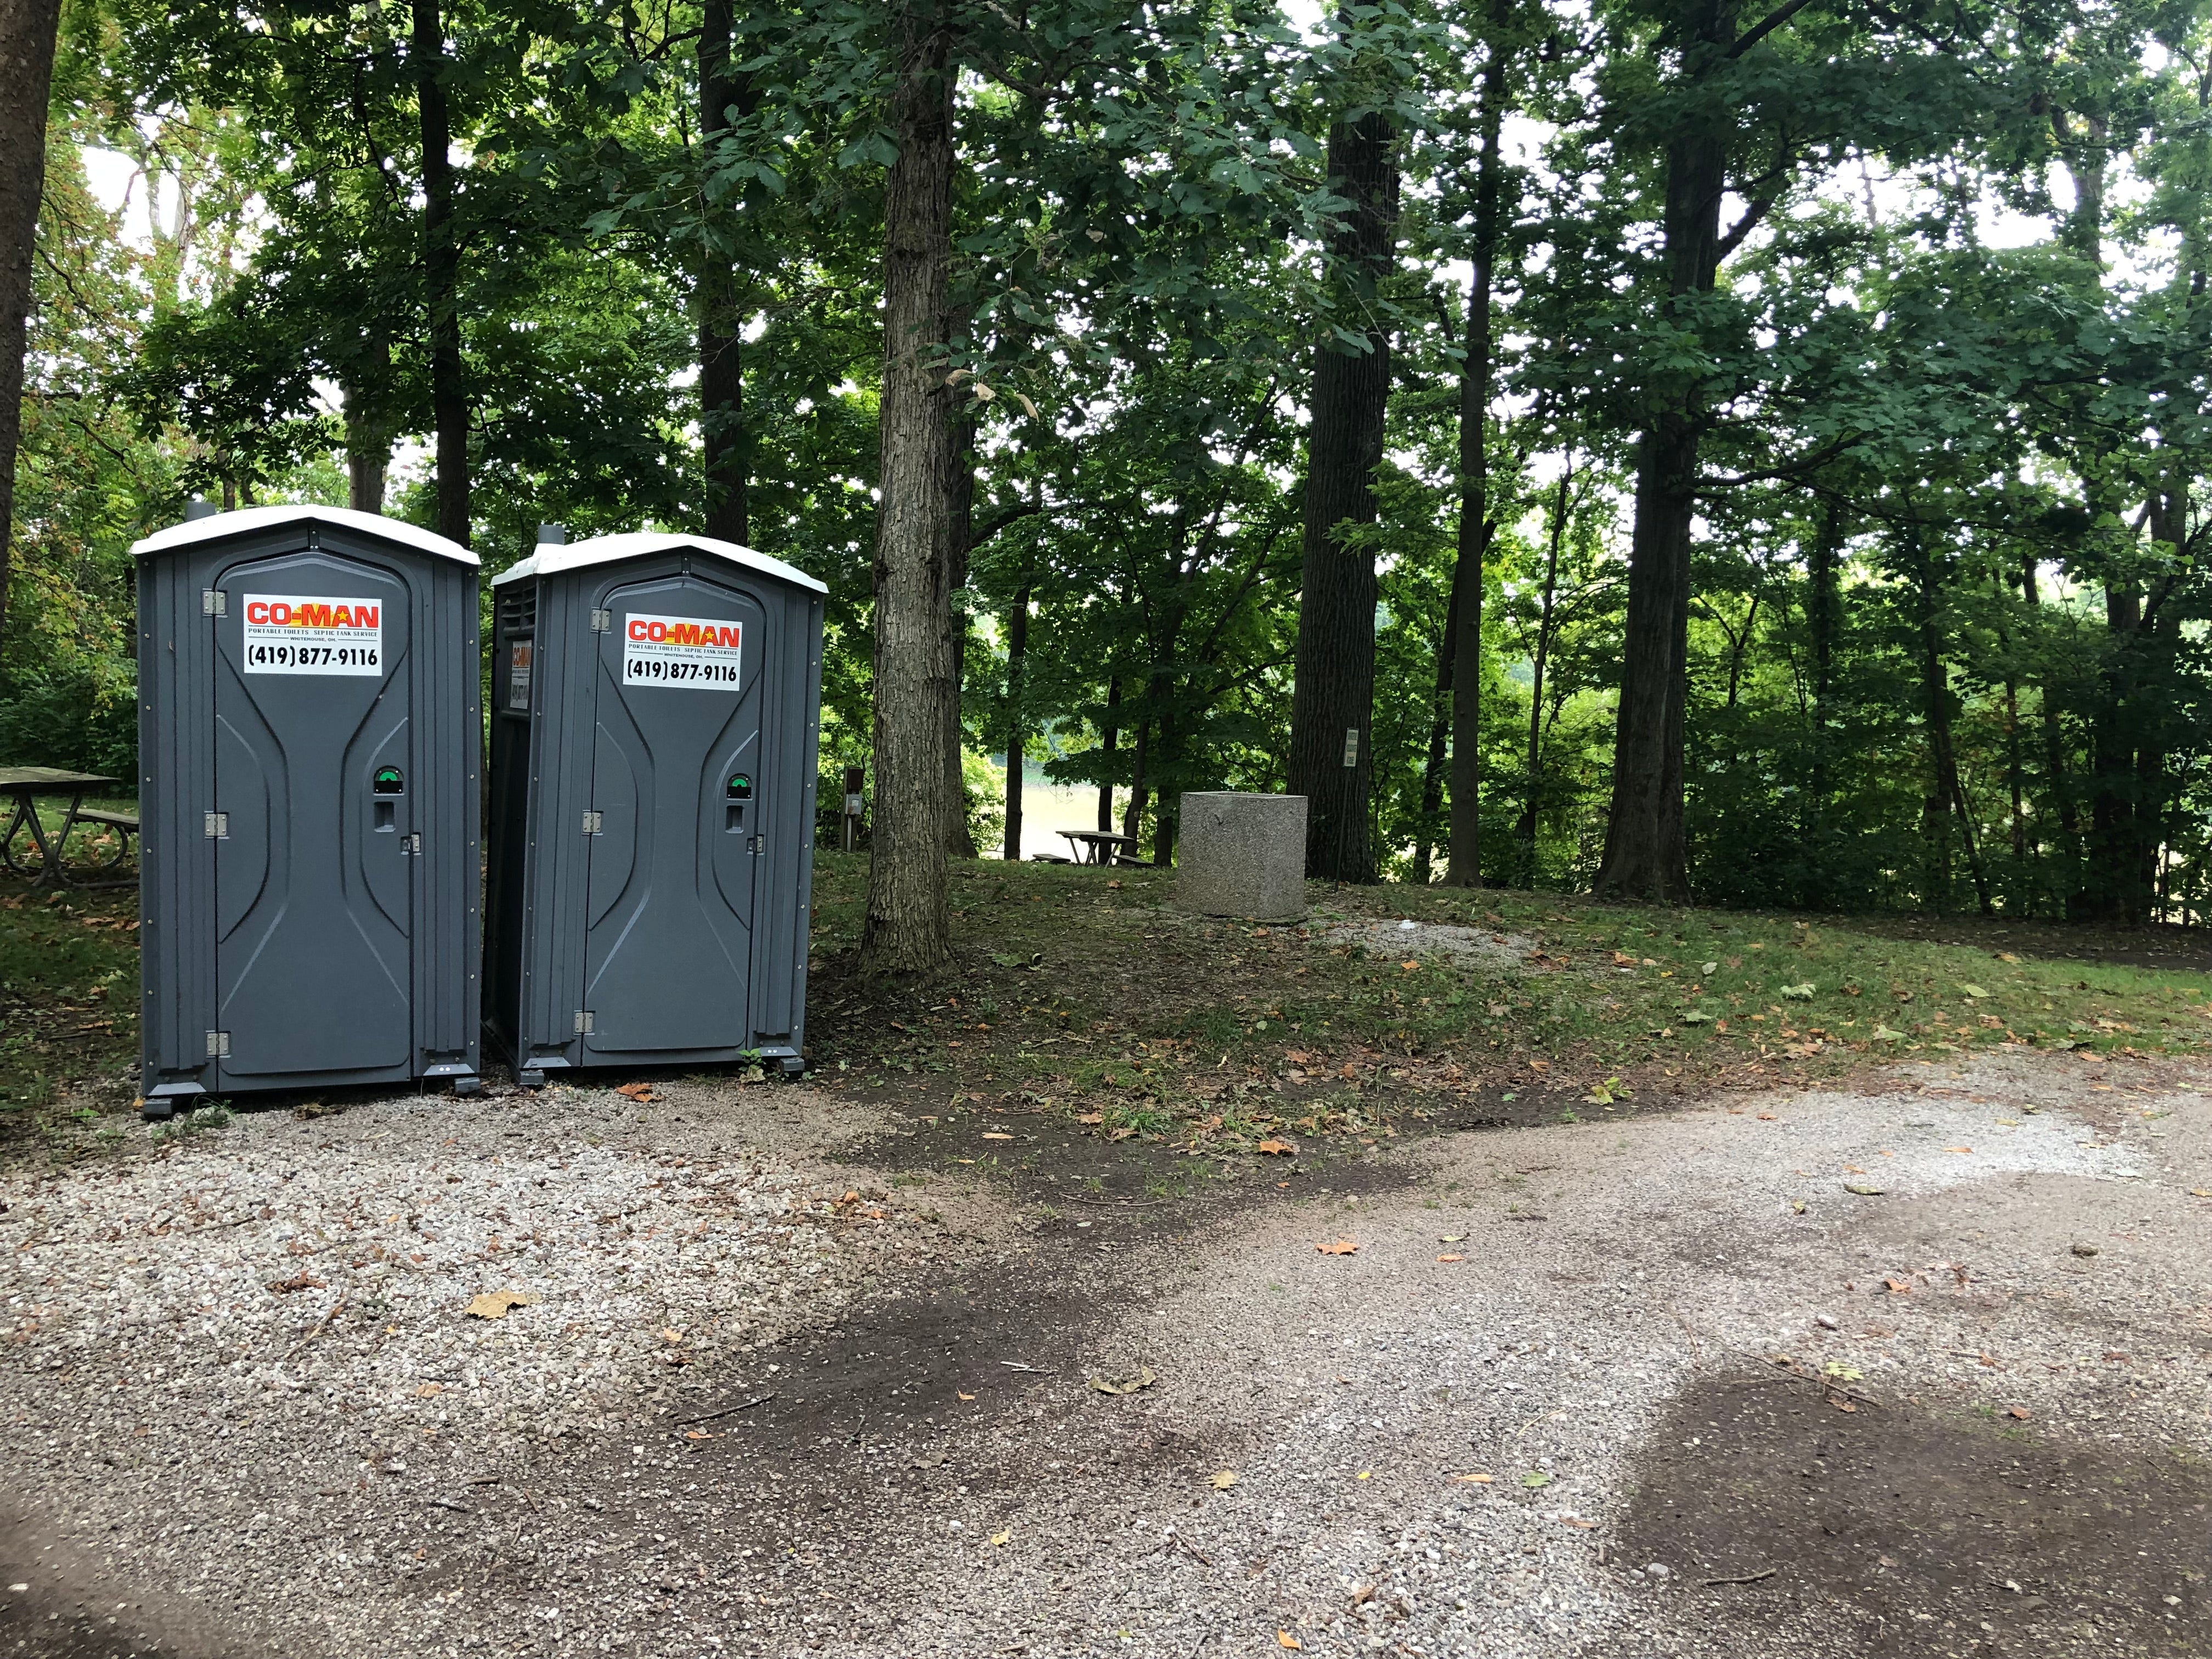 Only porta-potties throughout the park